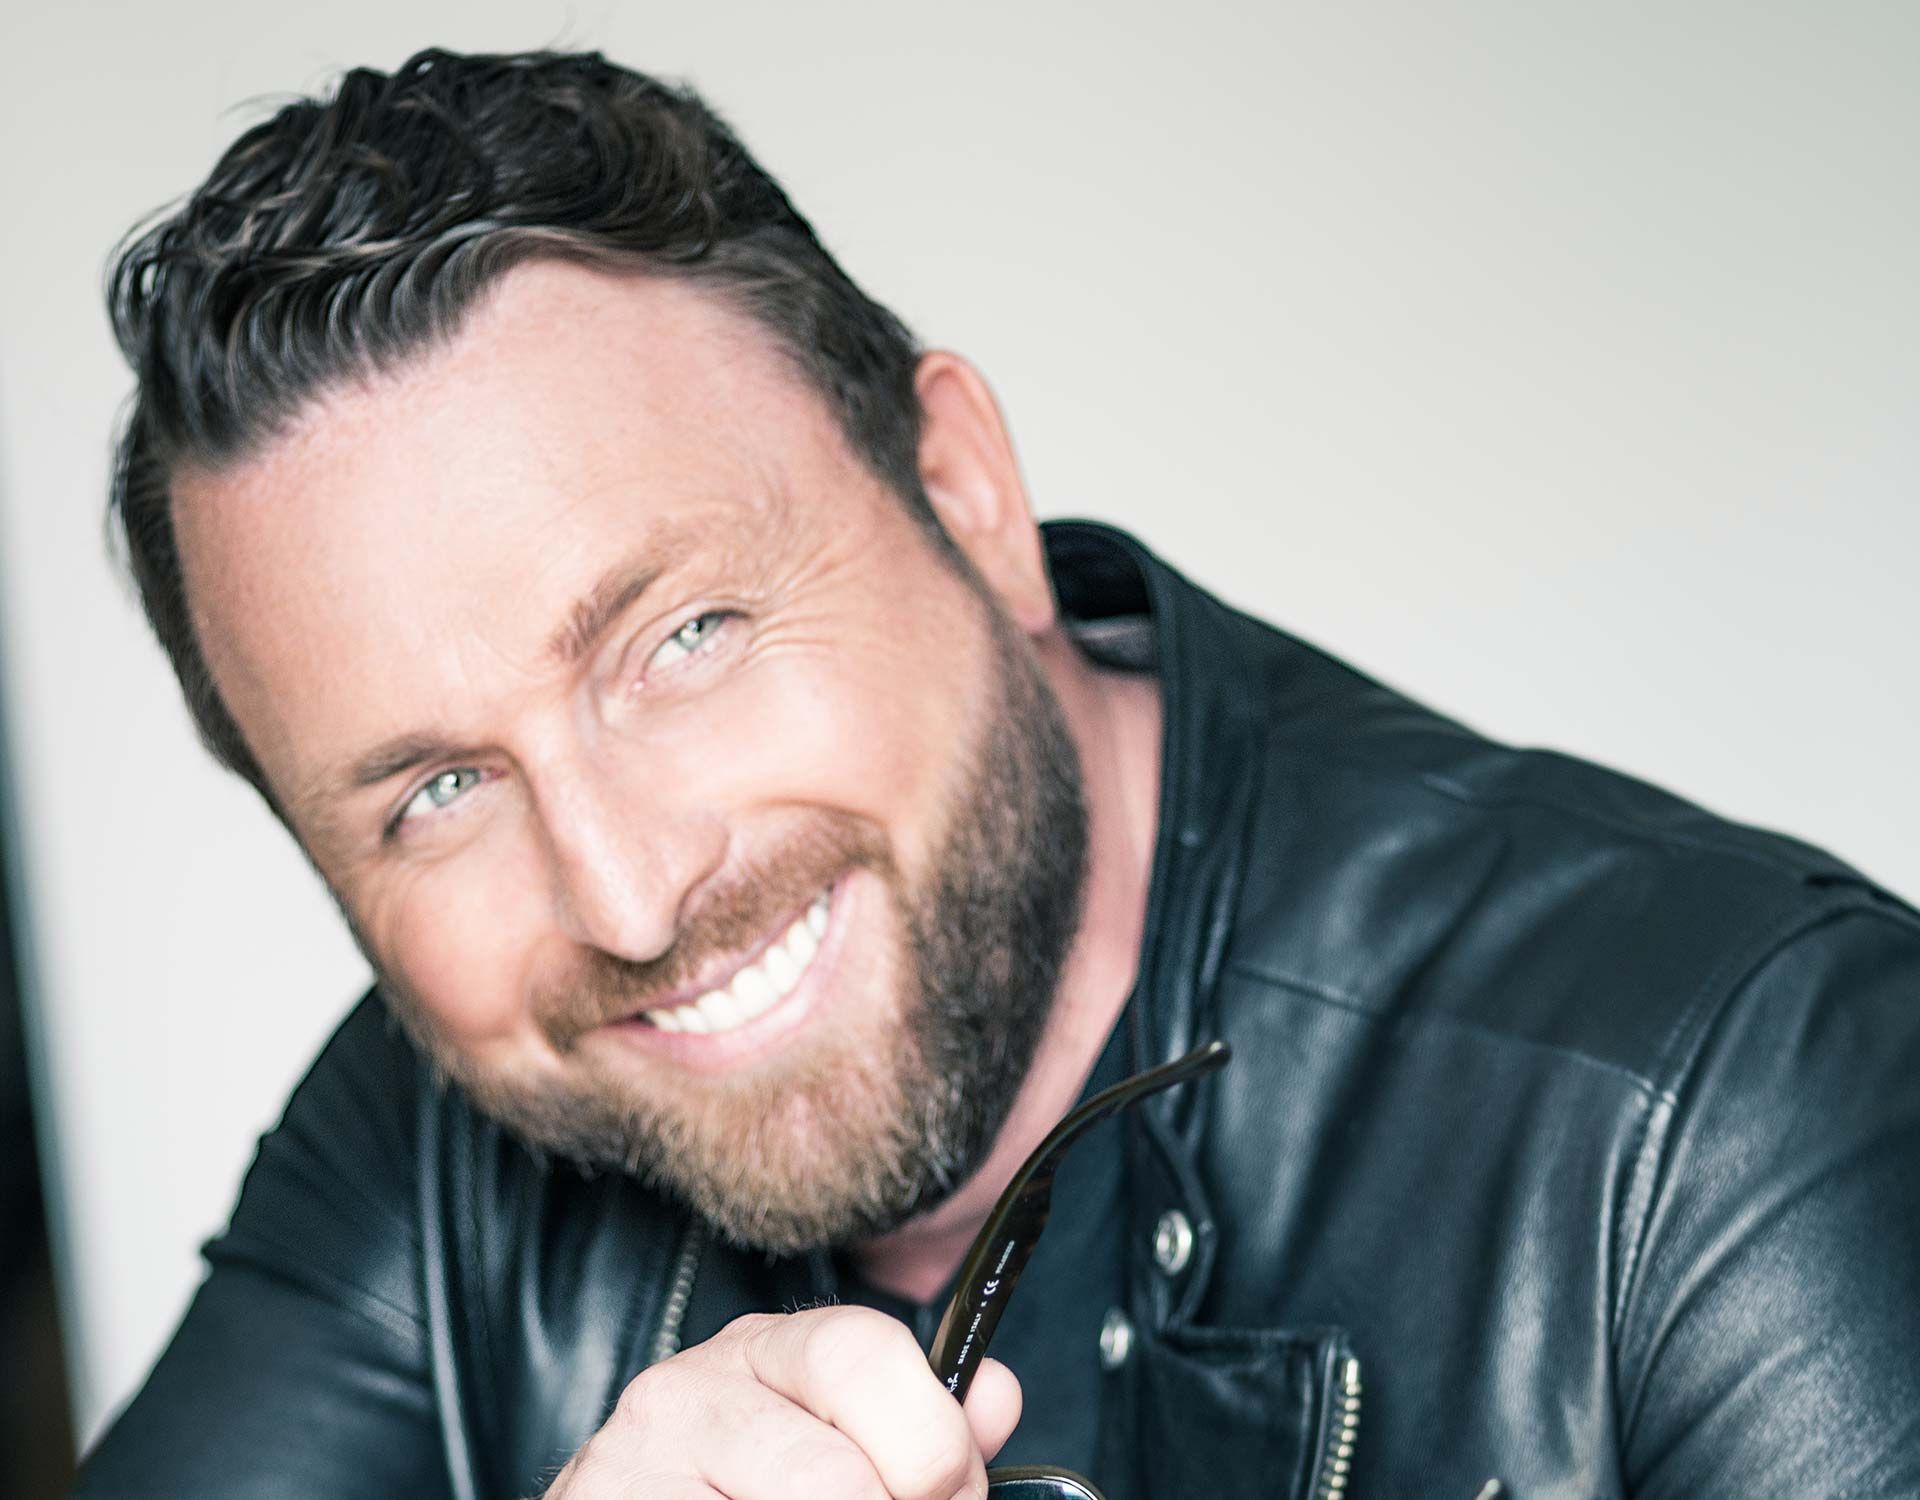 Johnny Reid Returns to the Abbotsford Centre this December with the ‘My Kind of Christmas’ Tour